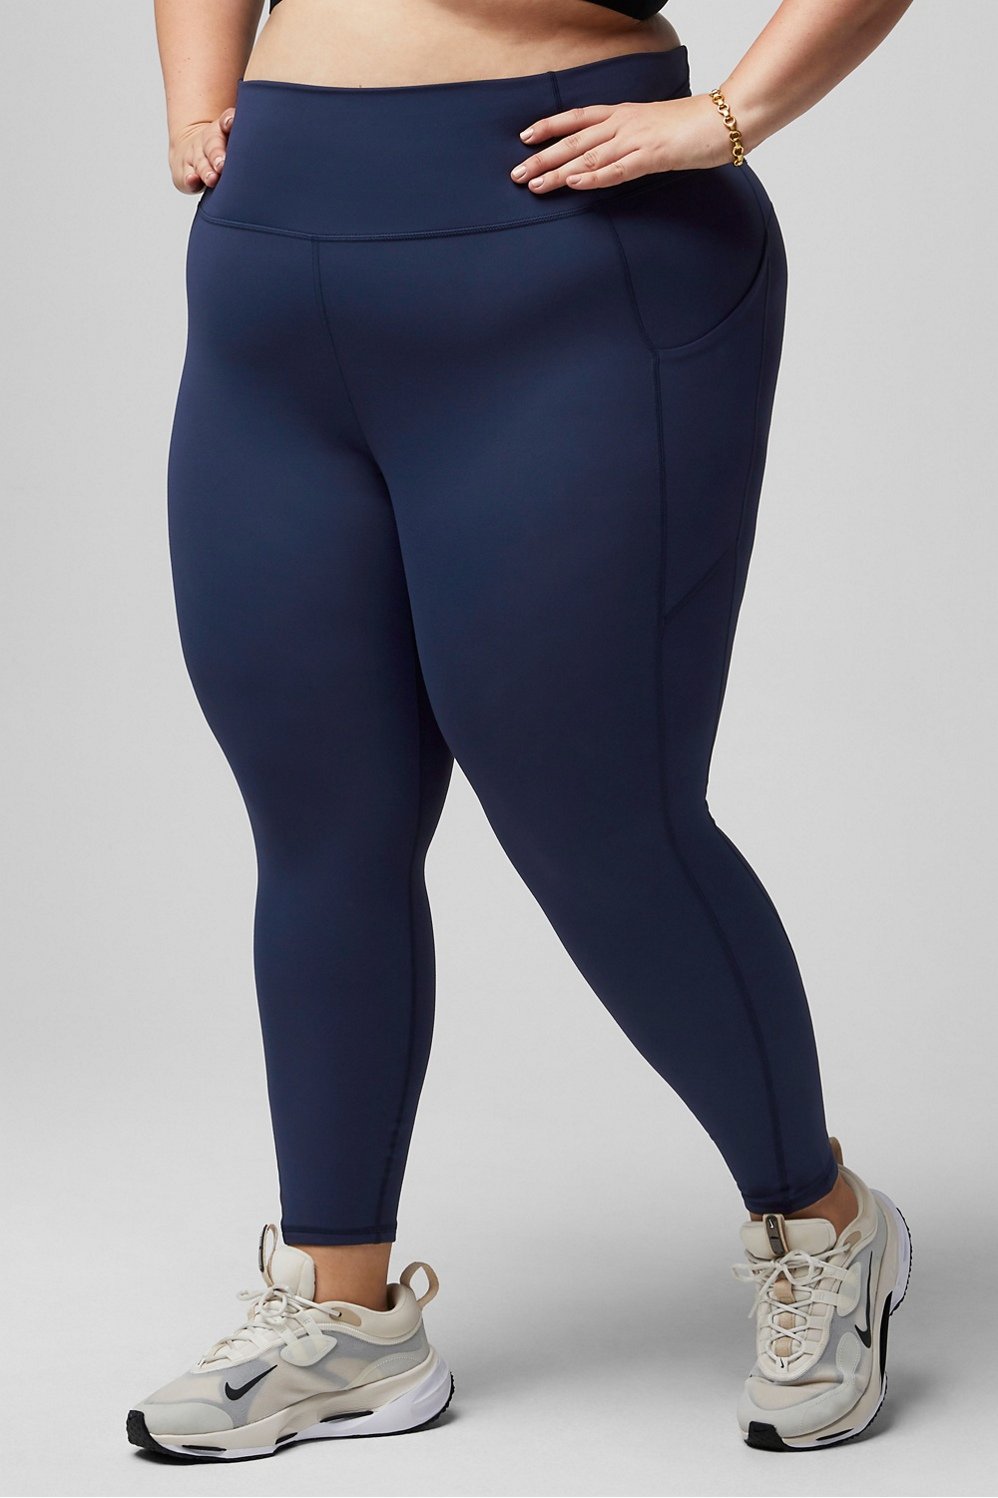 Whirl 2-Piece Outfit - Fabletics Canada